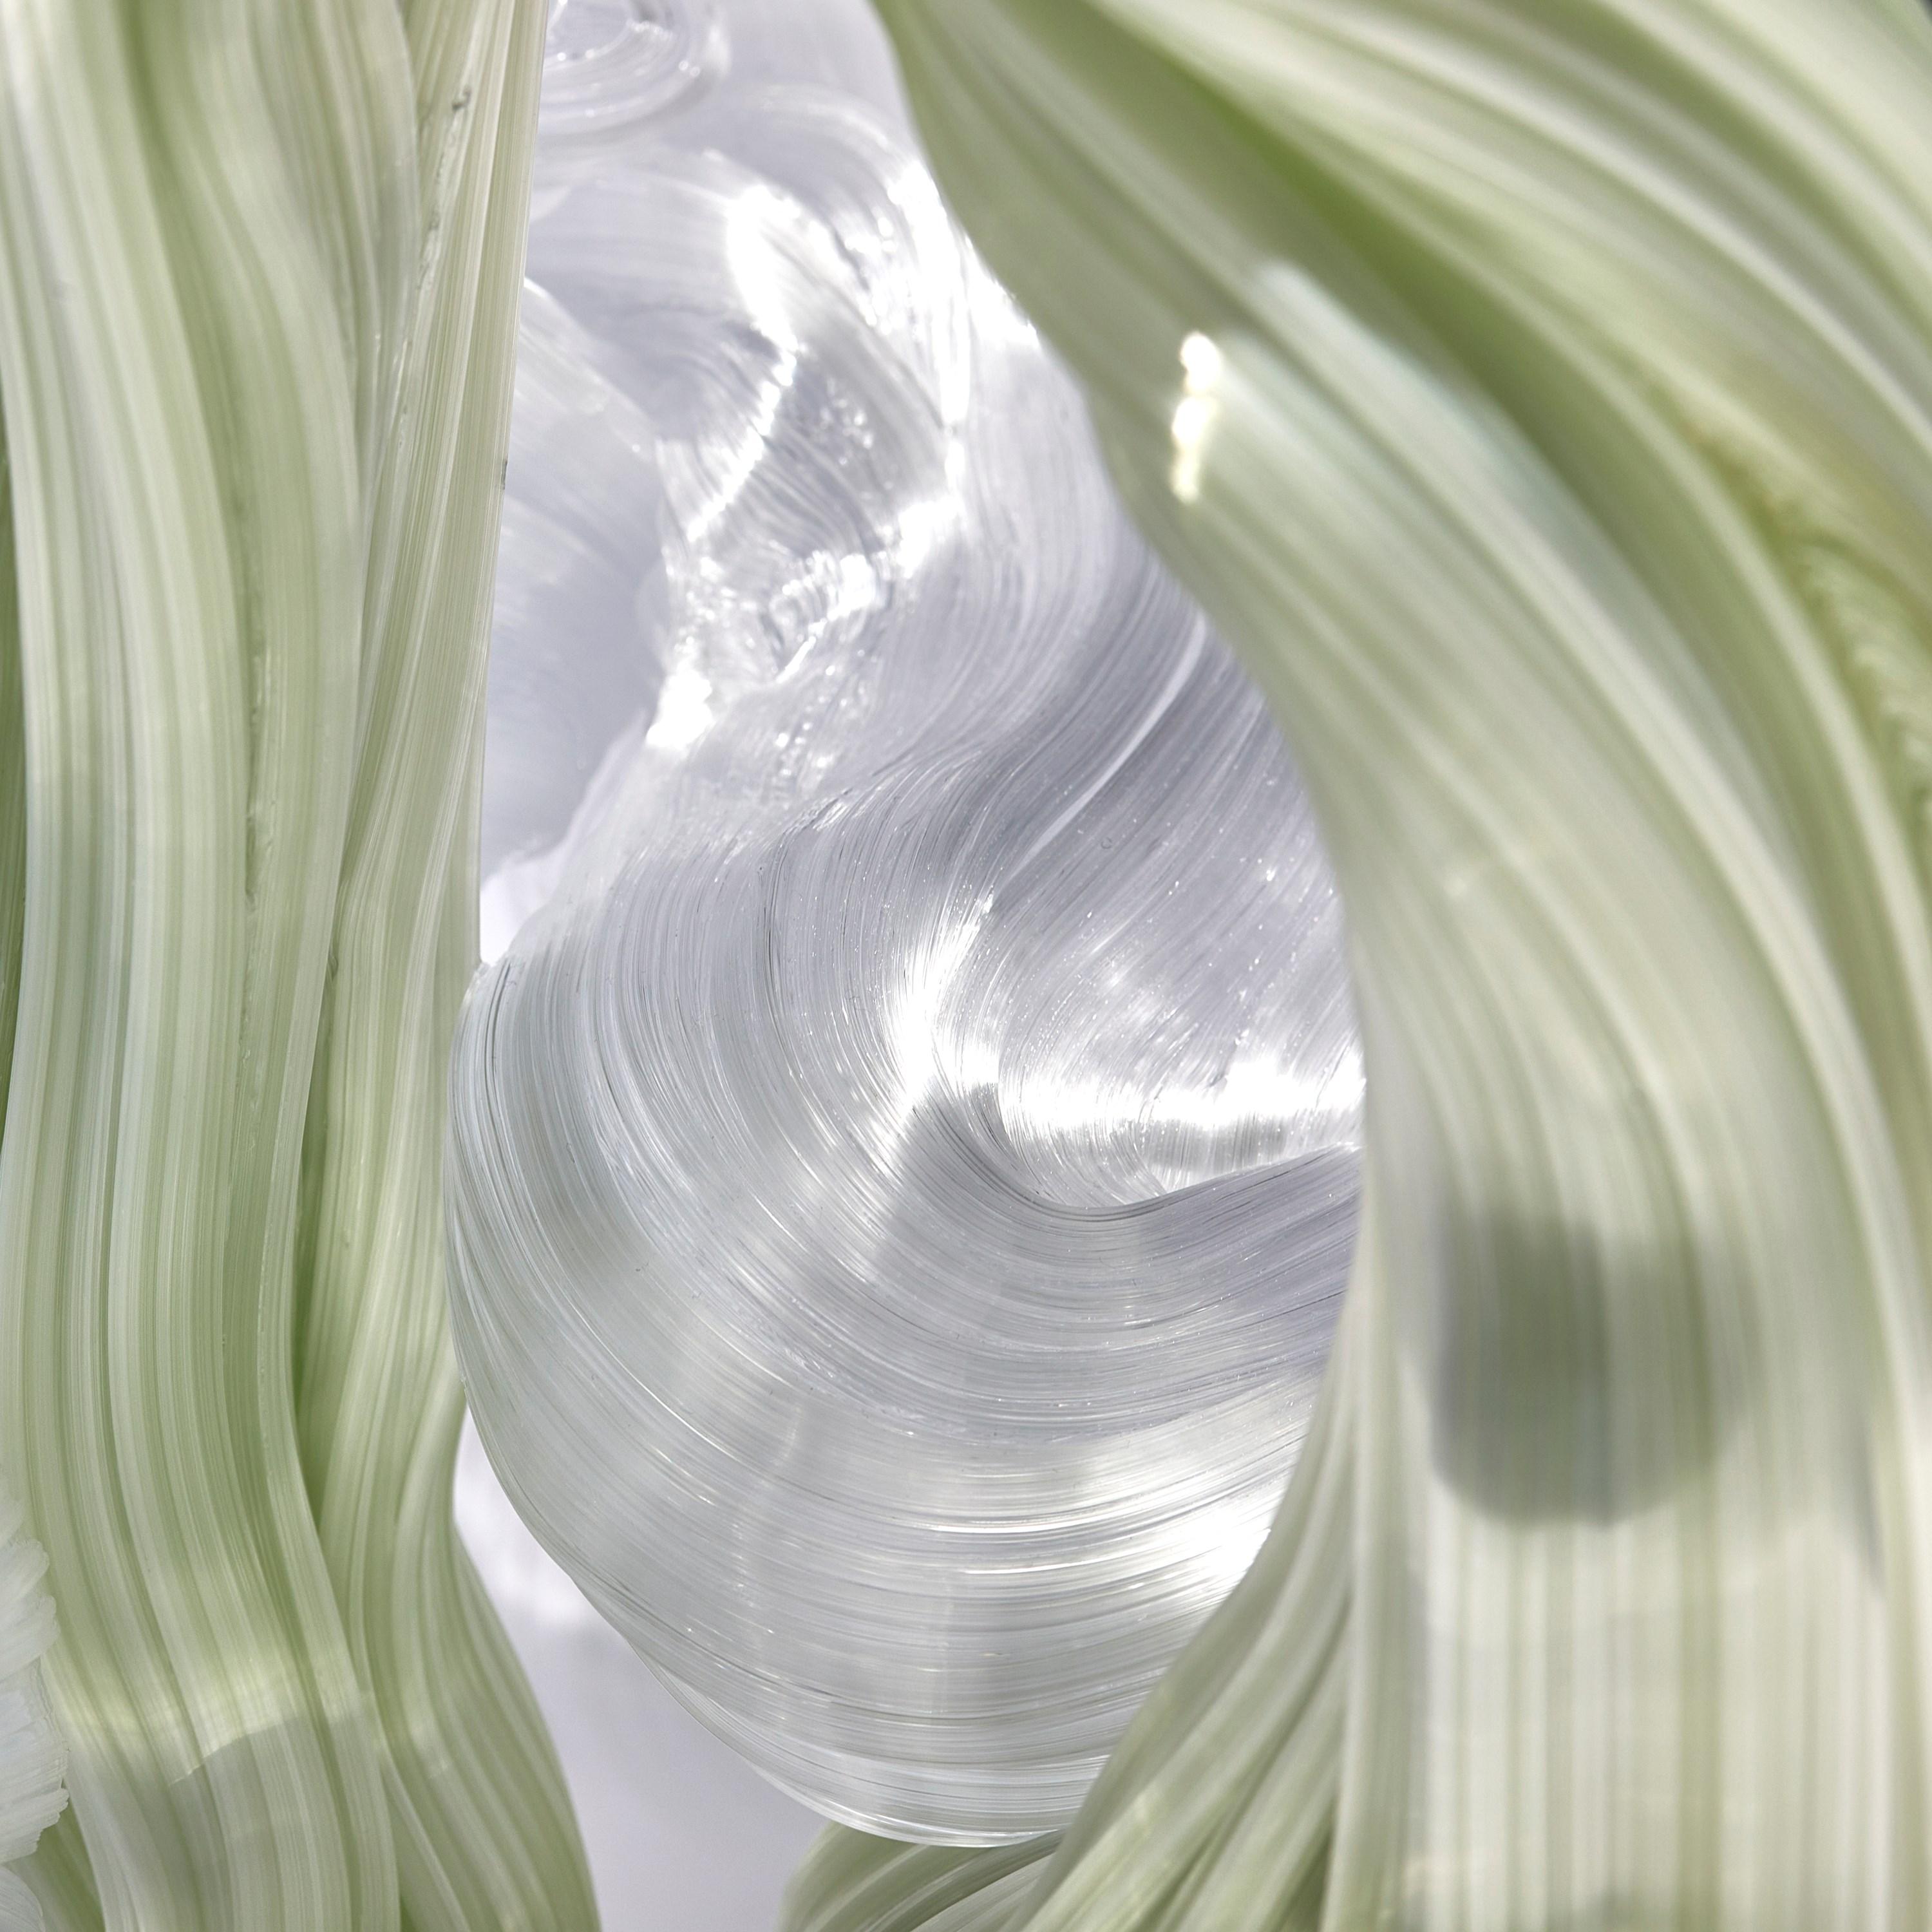 Contemporary Community, abstract white & soft lime green glass artwork by Maria Bang Espersen For Sale